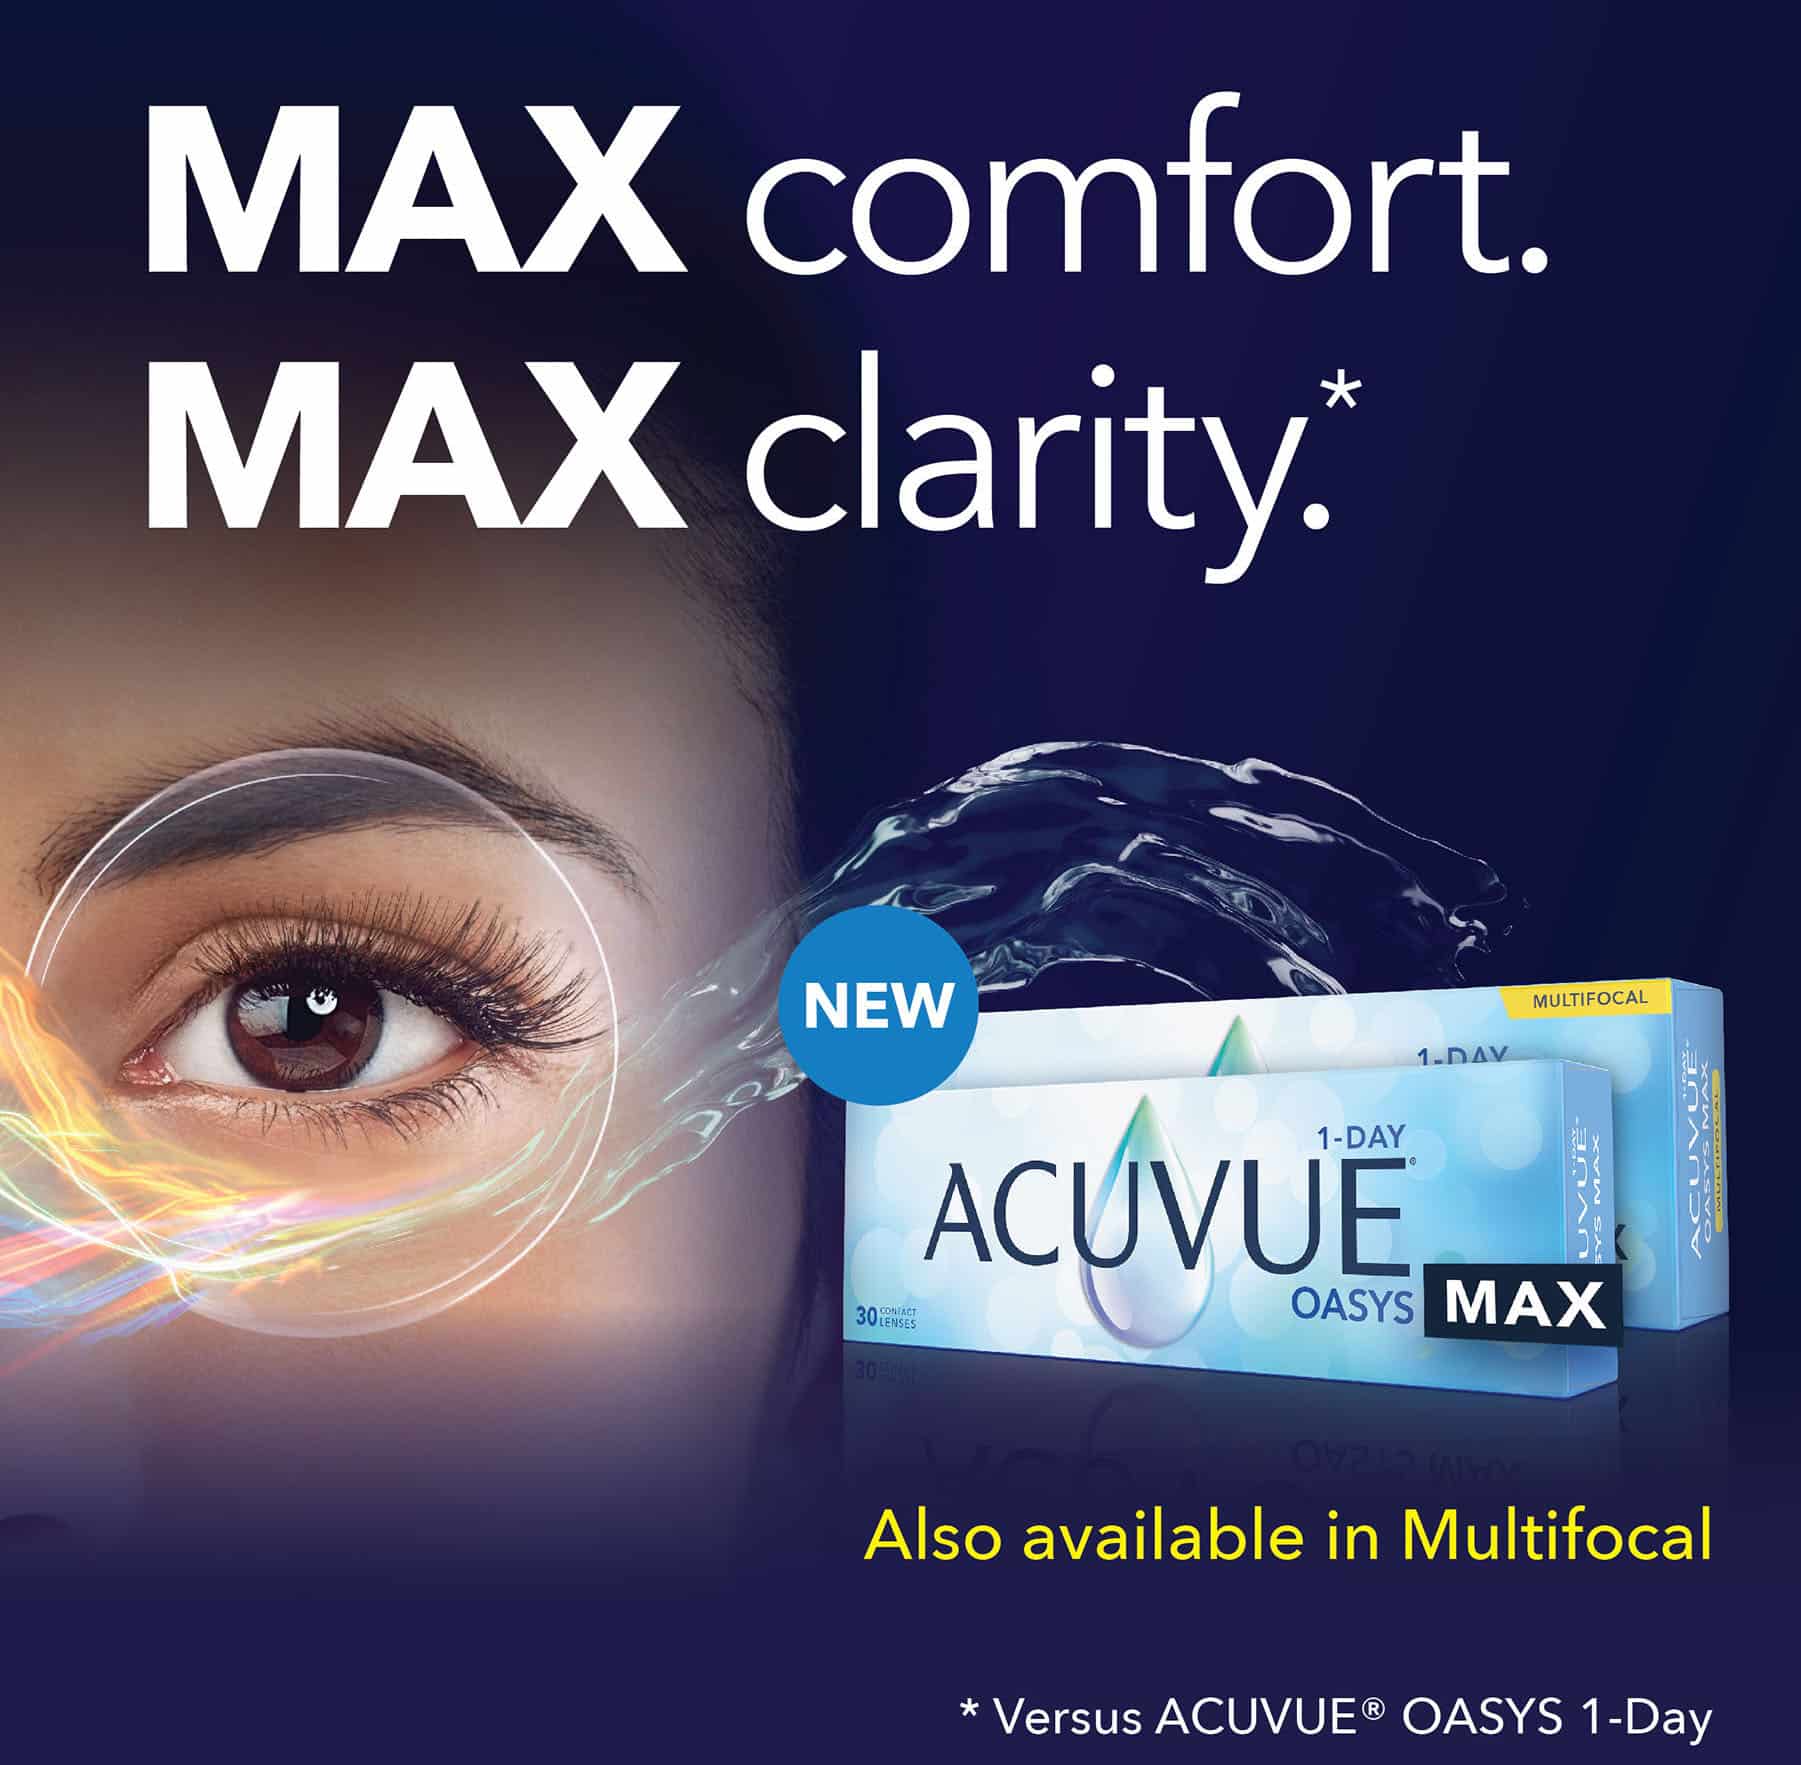 Z070 Acuvue Oasys MAX 1-Day Social Posts_Shere_EN